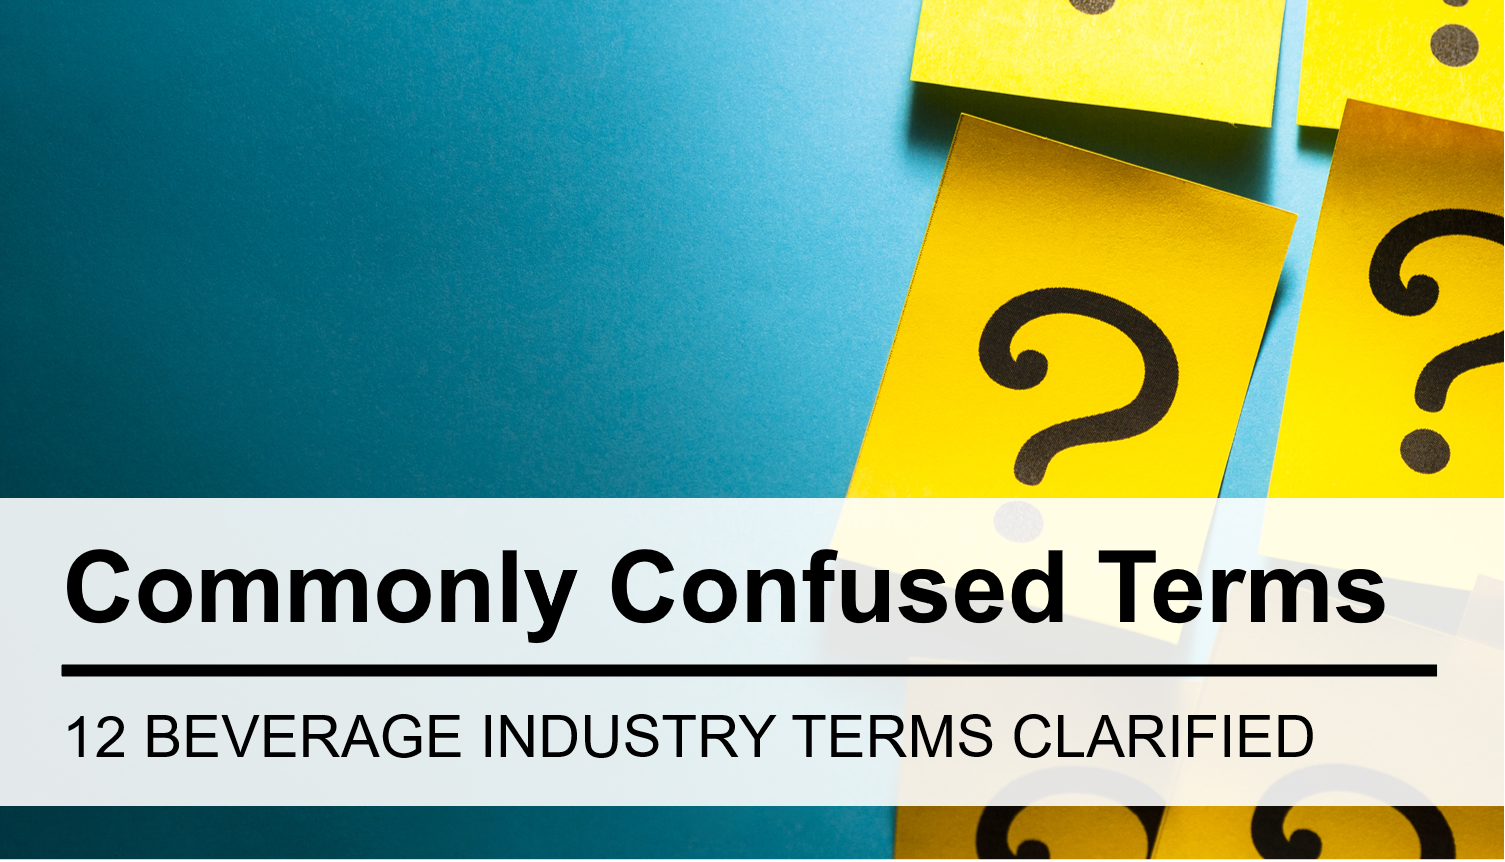 Commonly Confused Terms in the Beverage Industry